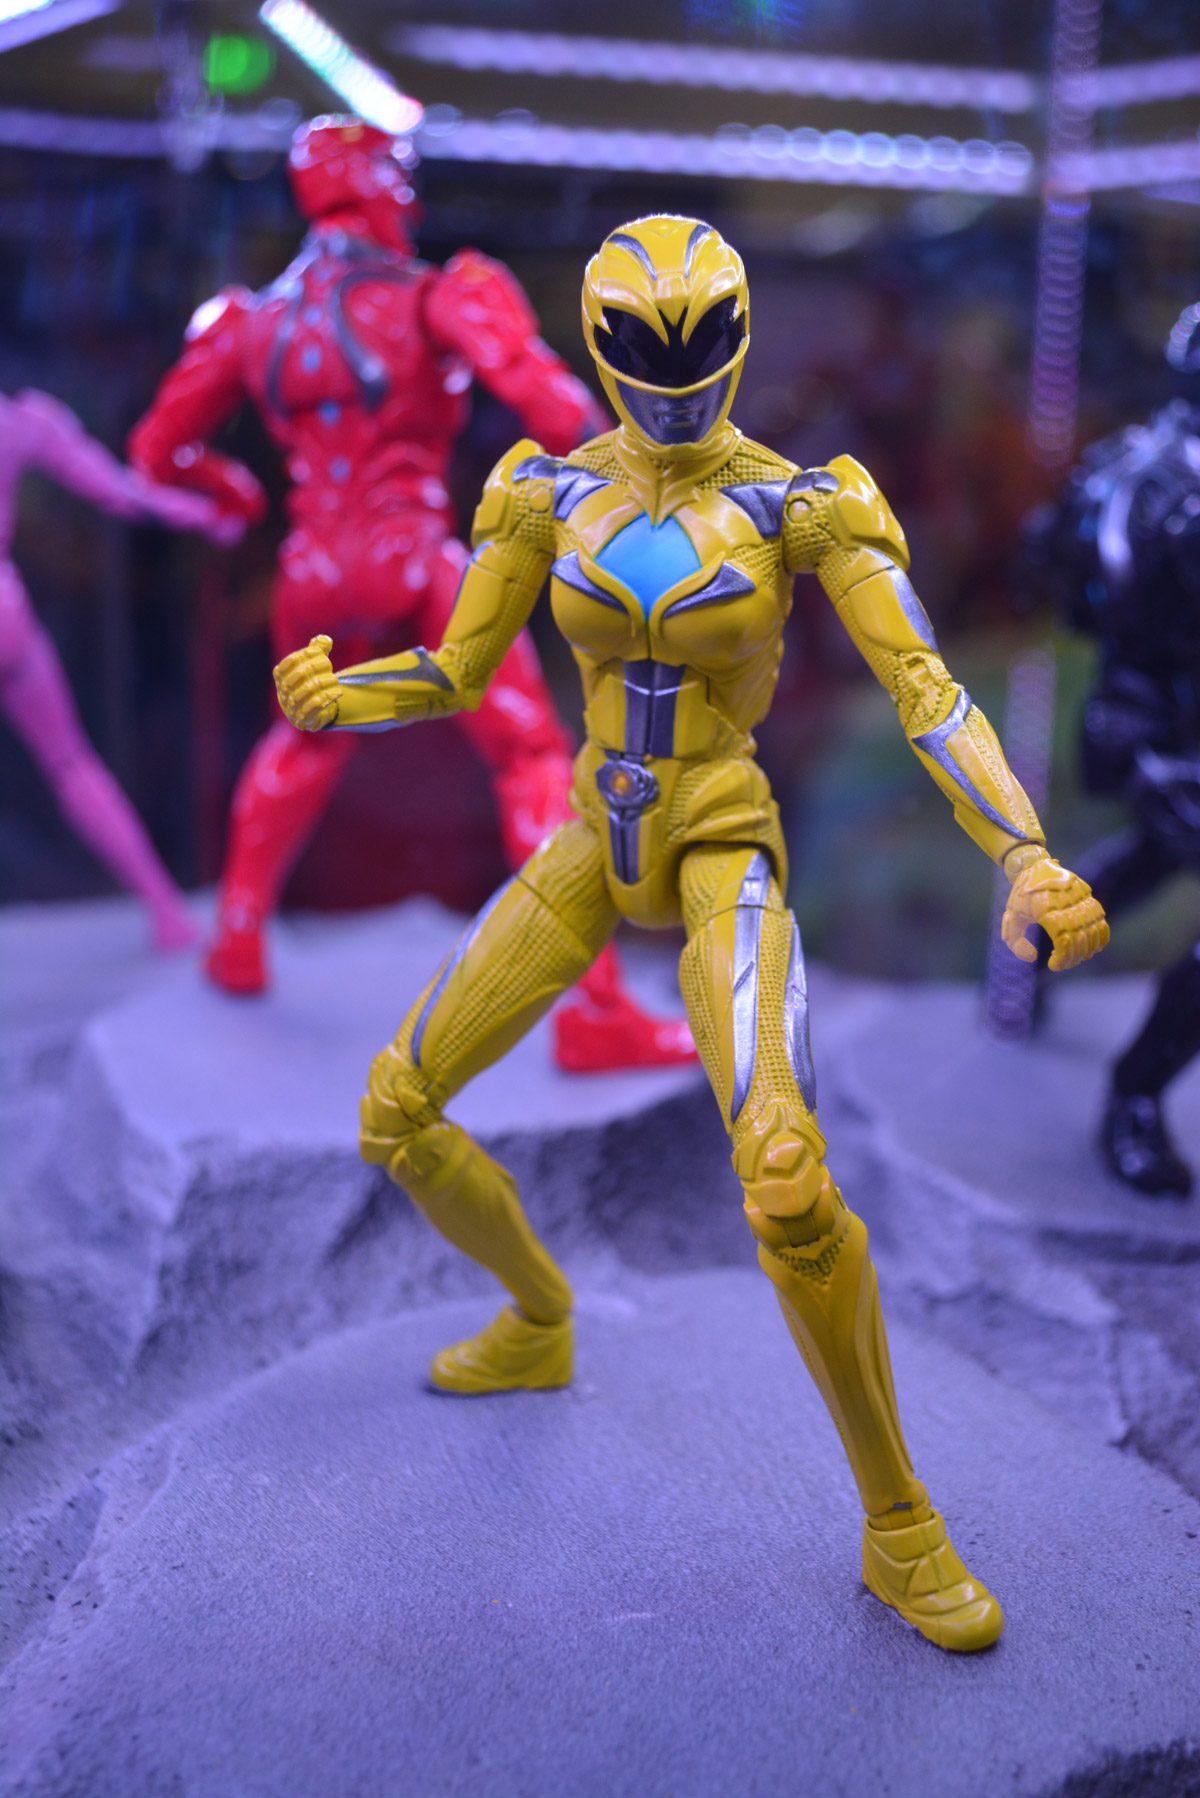 SDCC16: Power Rangers Action Figures Show New Movie Look - Previews World
